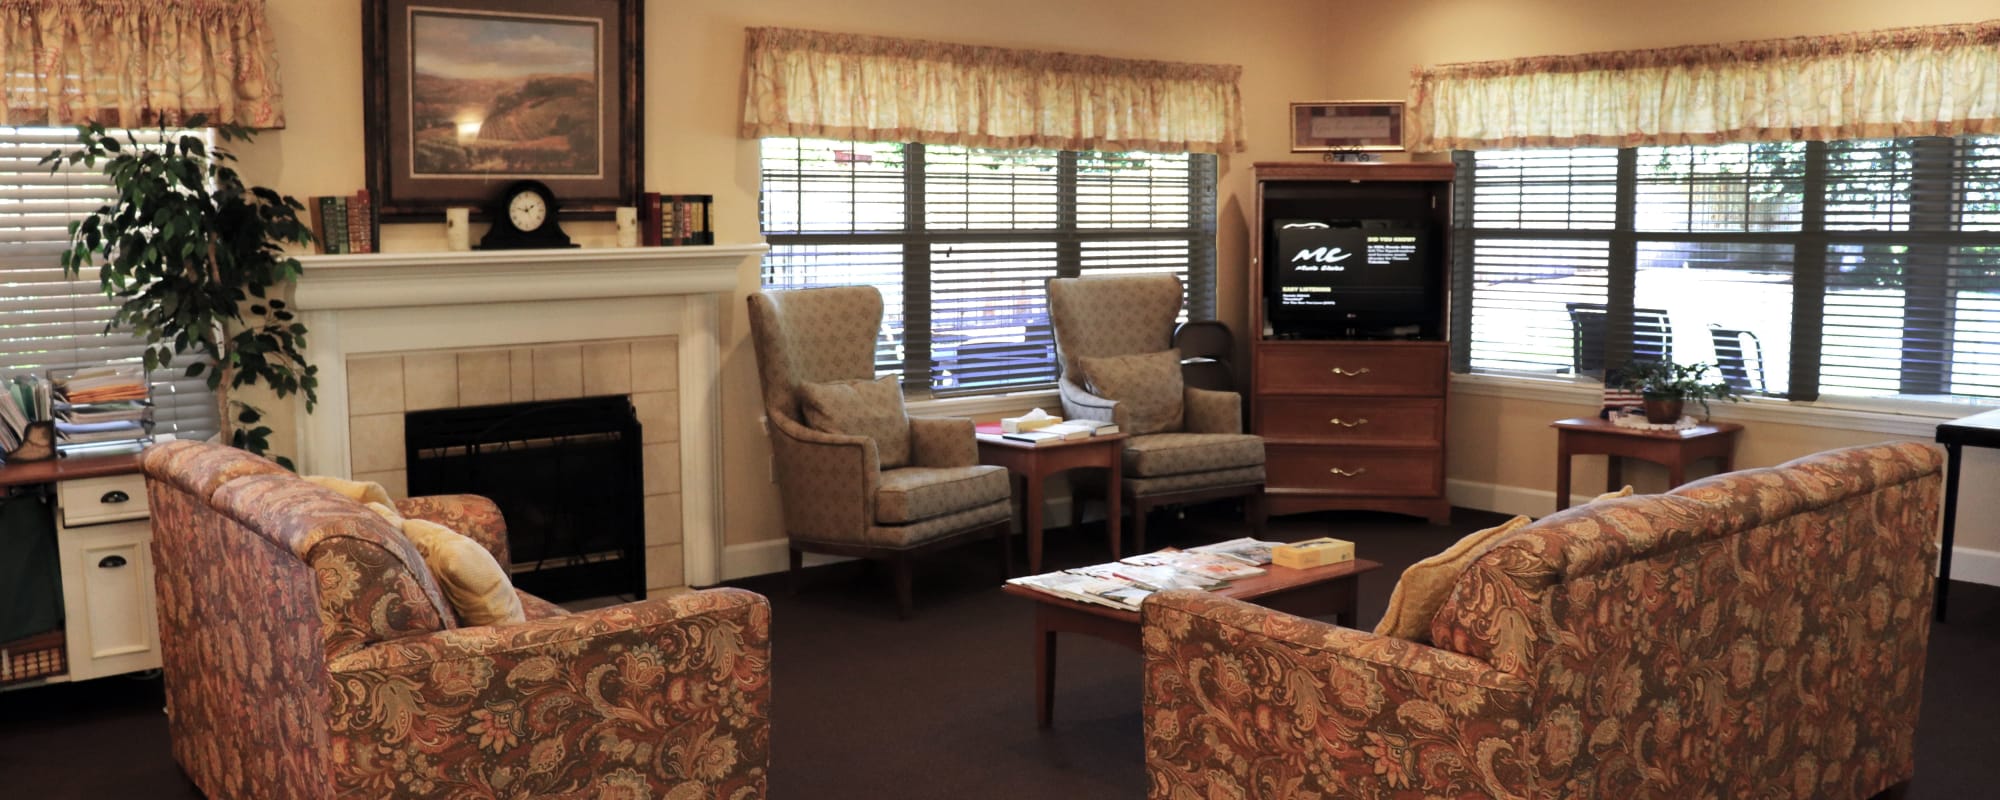 Cozy sitting area at upscale senior living facility complete with sofas, television set and fireplace at The Springs at Willowcreek in Salem, Oregon